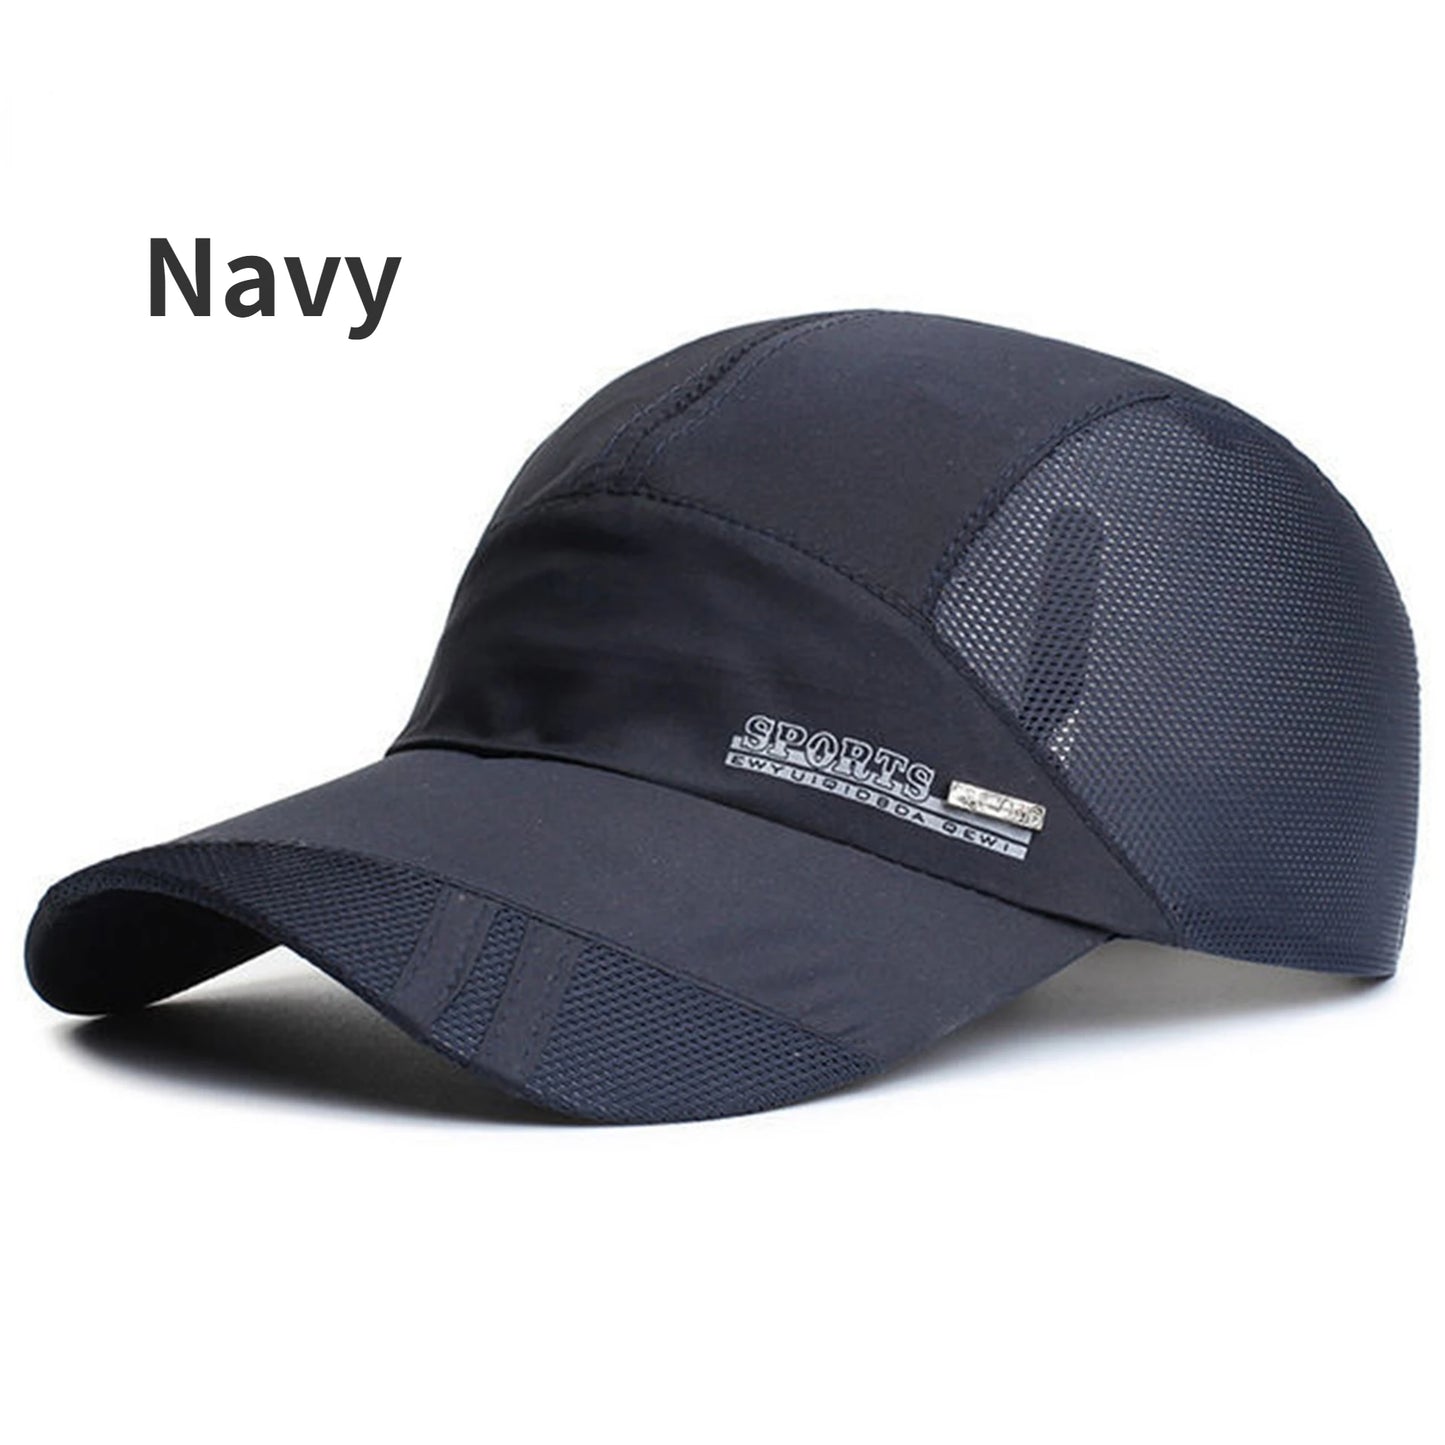 Adjustable Quick-Dry Breathable Mesh Cap